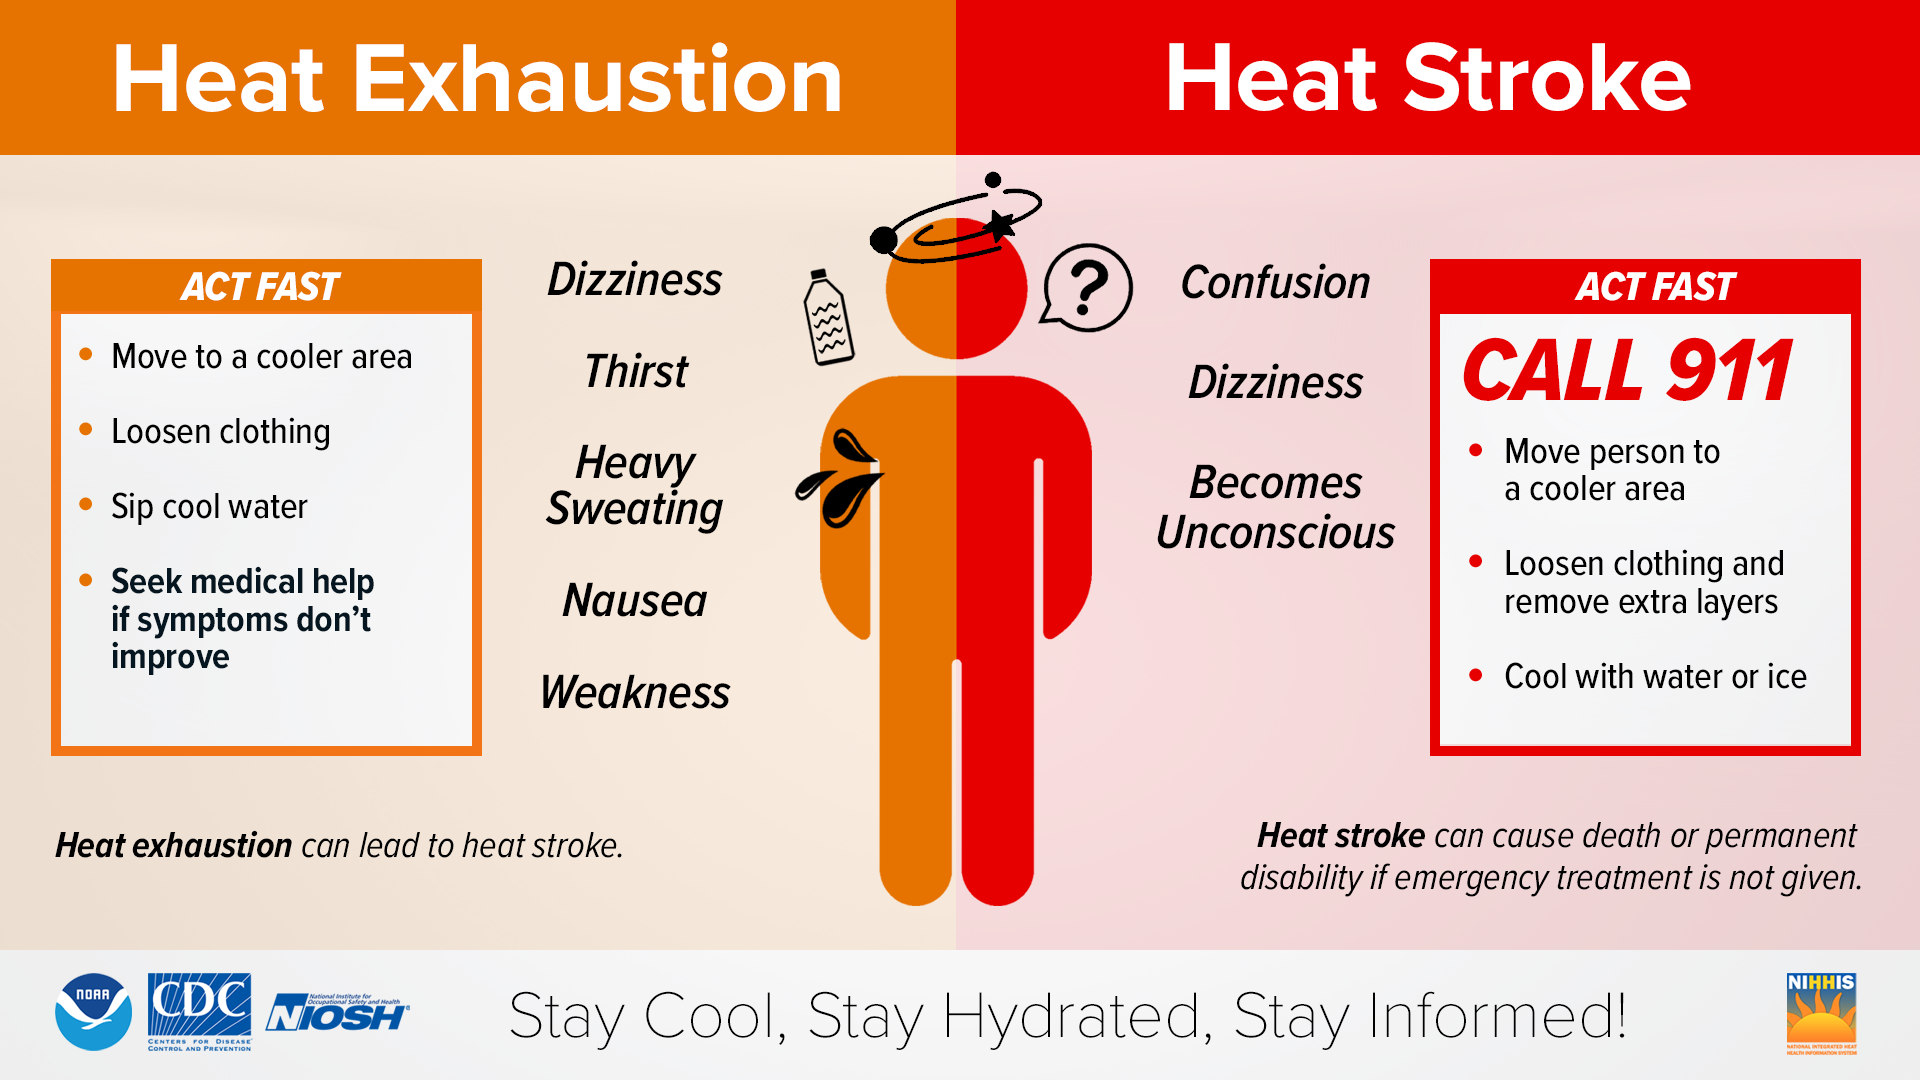 Heat Exhaustion symptoms: dizziness, thirst, heavy sweating, nausea, weakness. Act fast: move to a cooler area, loosen clothing, sip cool water, seek medical help if symptoms don't improve. Heat Stroke symptoms: confusion, dizziness, becomes unconscious. Act fast: call 911! Move person to a cooler area, loosen clothing and remove extra layers, cool with water or ice.